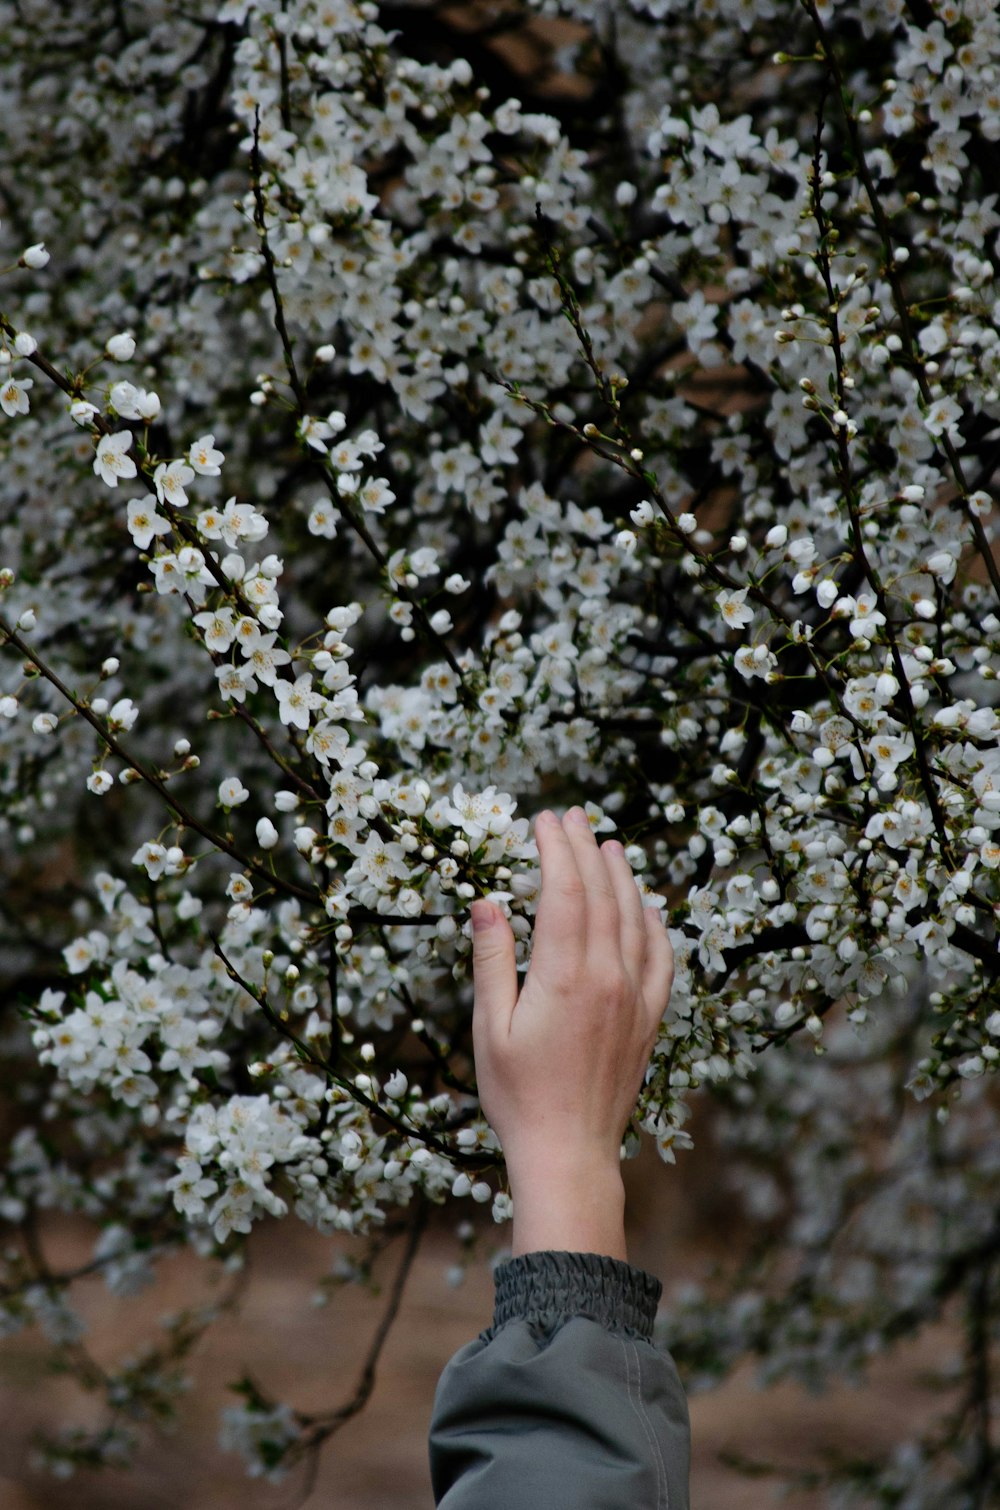 a person reaching up to a tree with white flowers